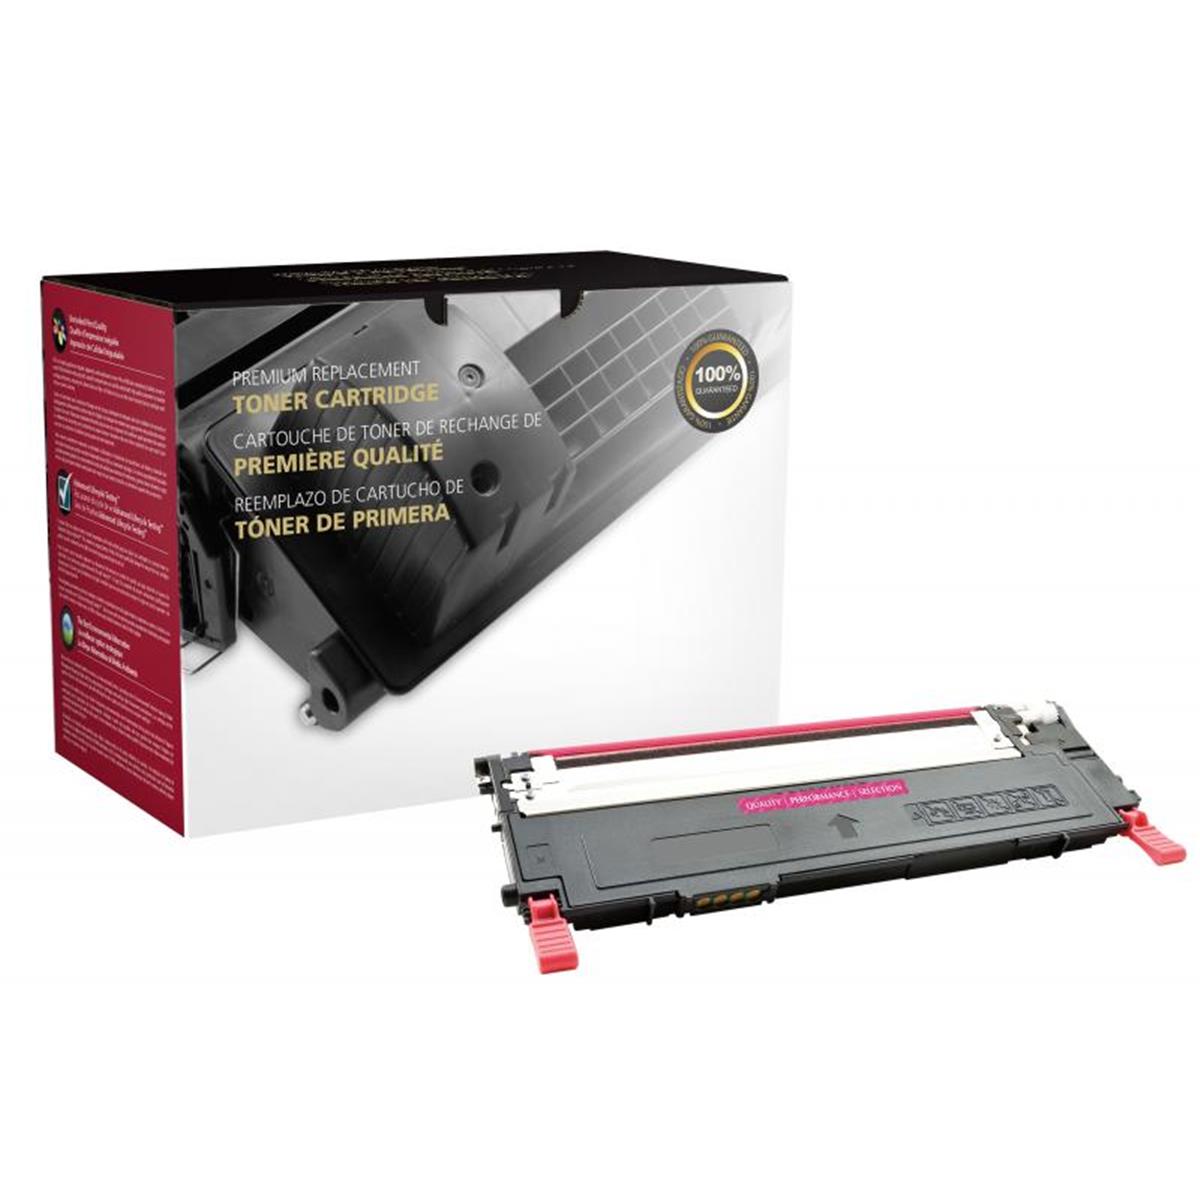 Picture of Dell 200219 Magenta Toner Cartridge for Dell 1230 & 1235